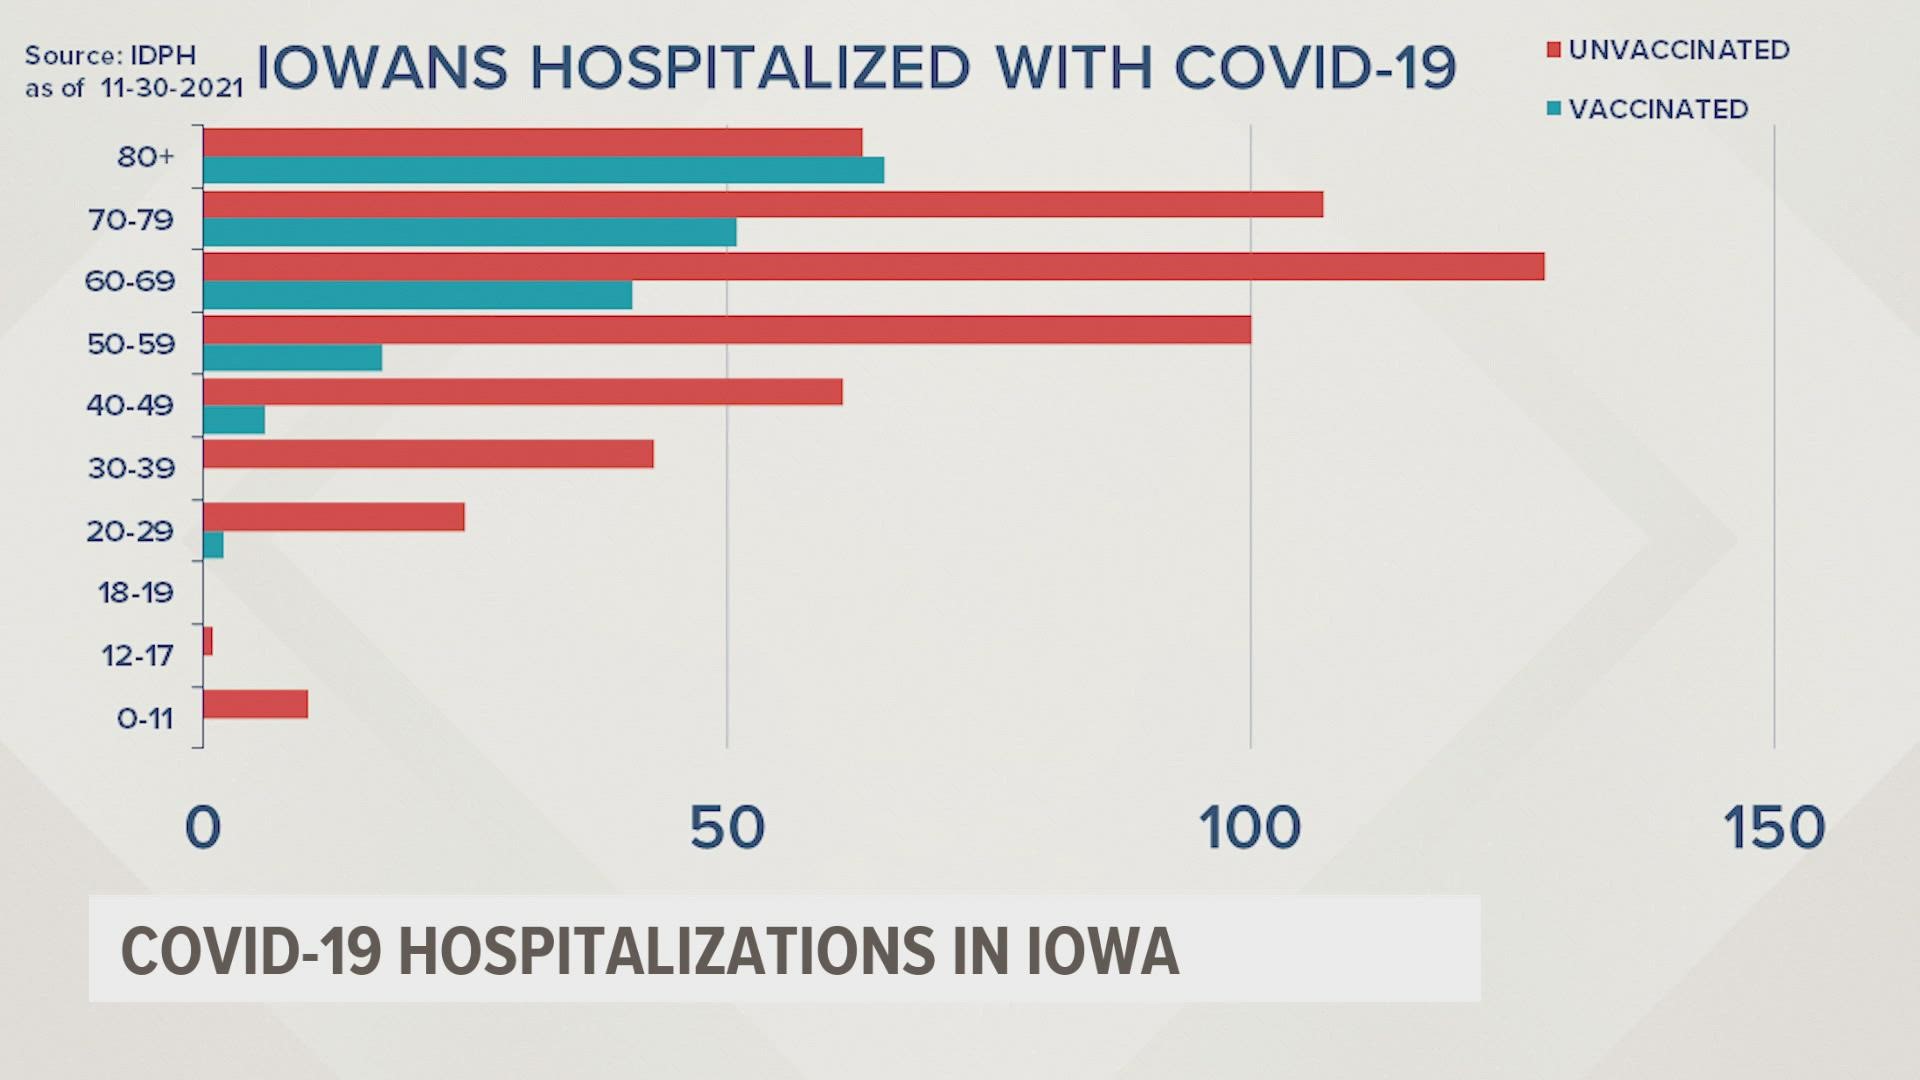 Iowa doctors say vaccines are the easiest way to keep people out of the hospital, and the data reinforces that.